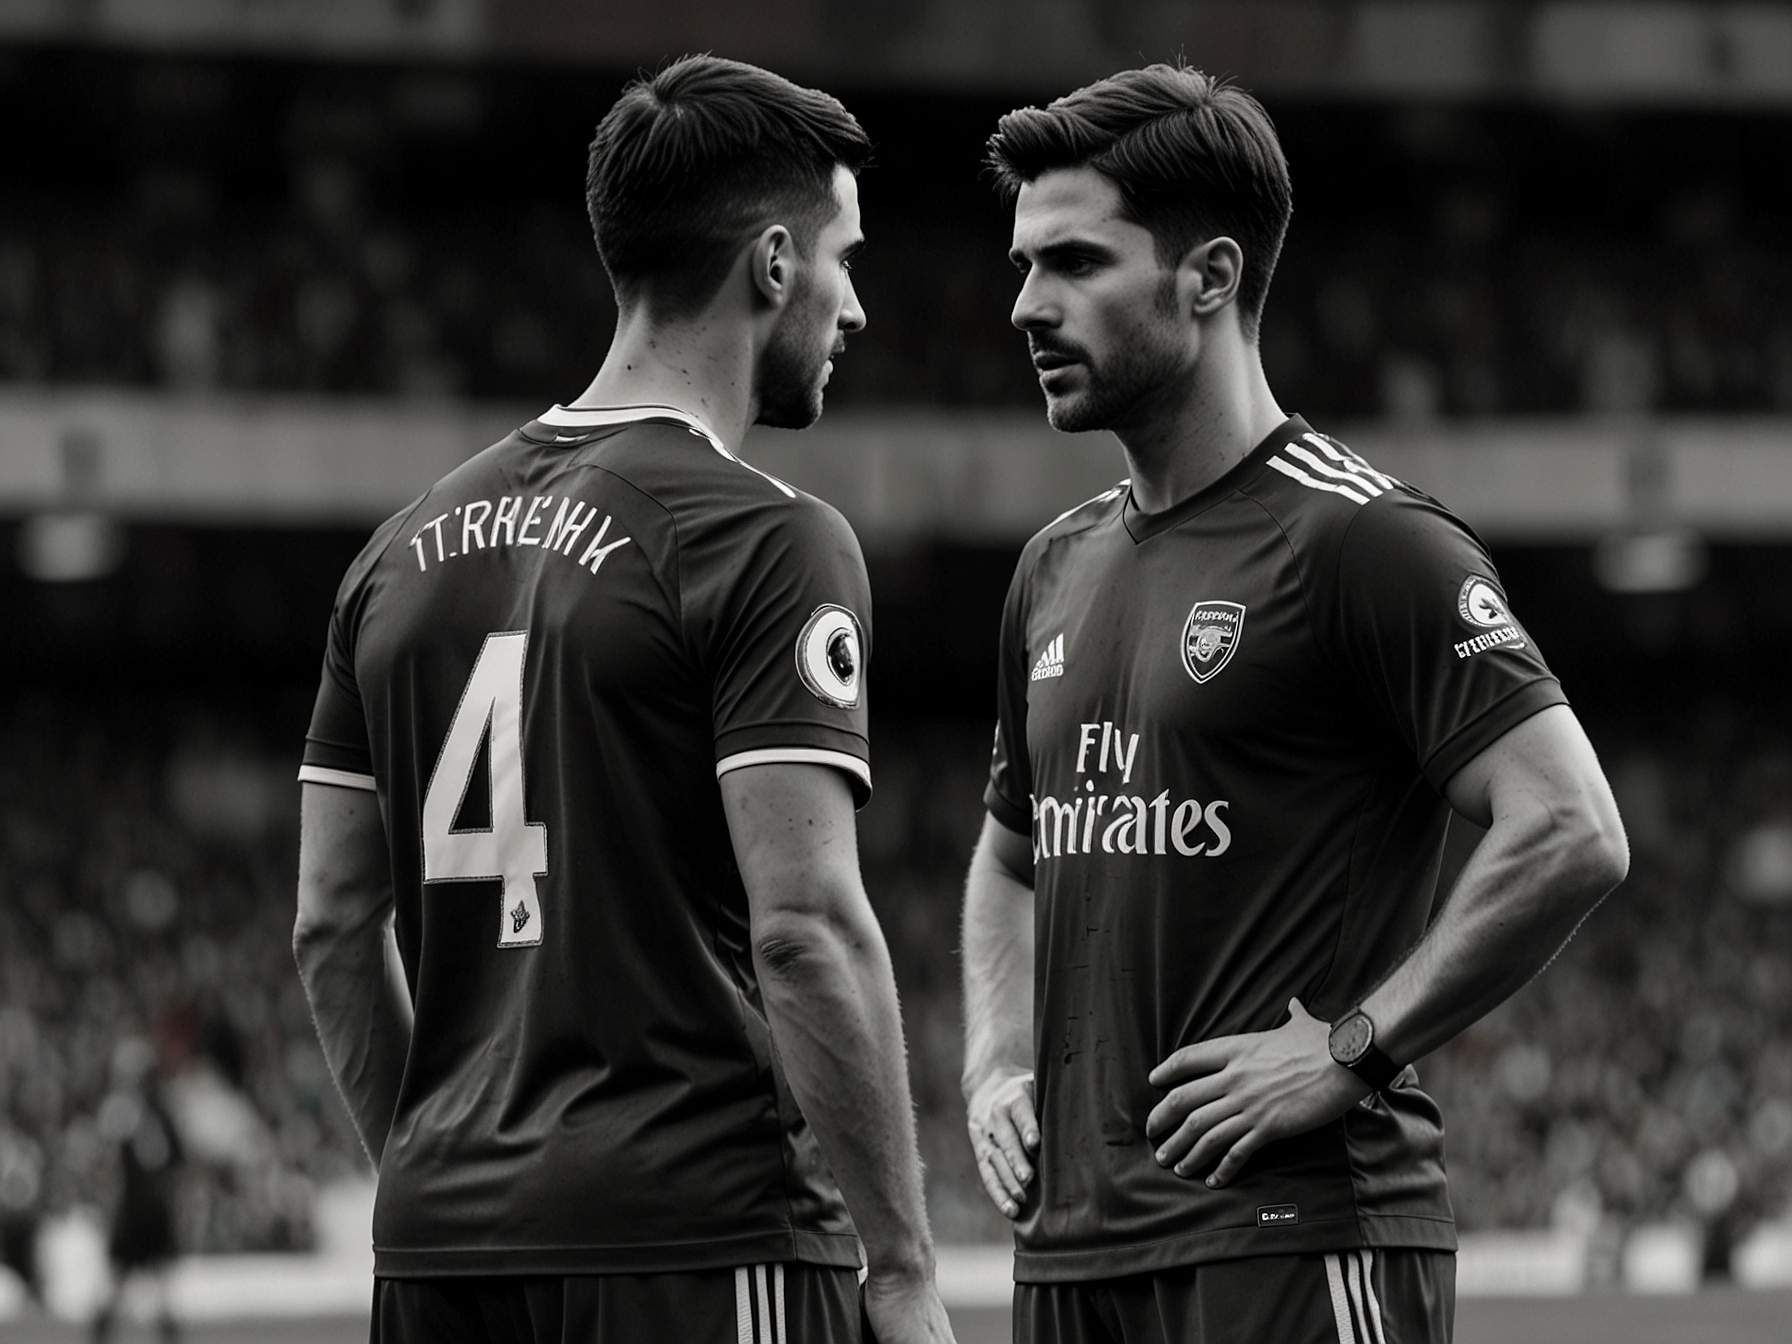 Mikel Arteta discussing strategy with Kieran Tierney during an Arsenal match, illustrating Tierney's crucial role in the team amidst transfer speculations.